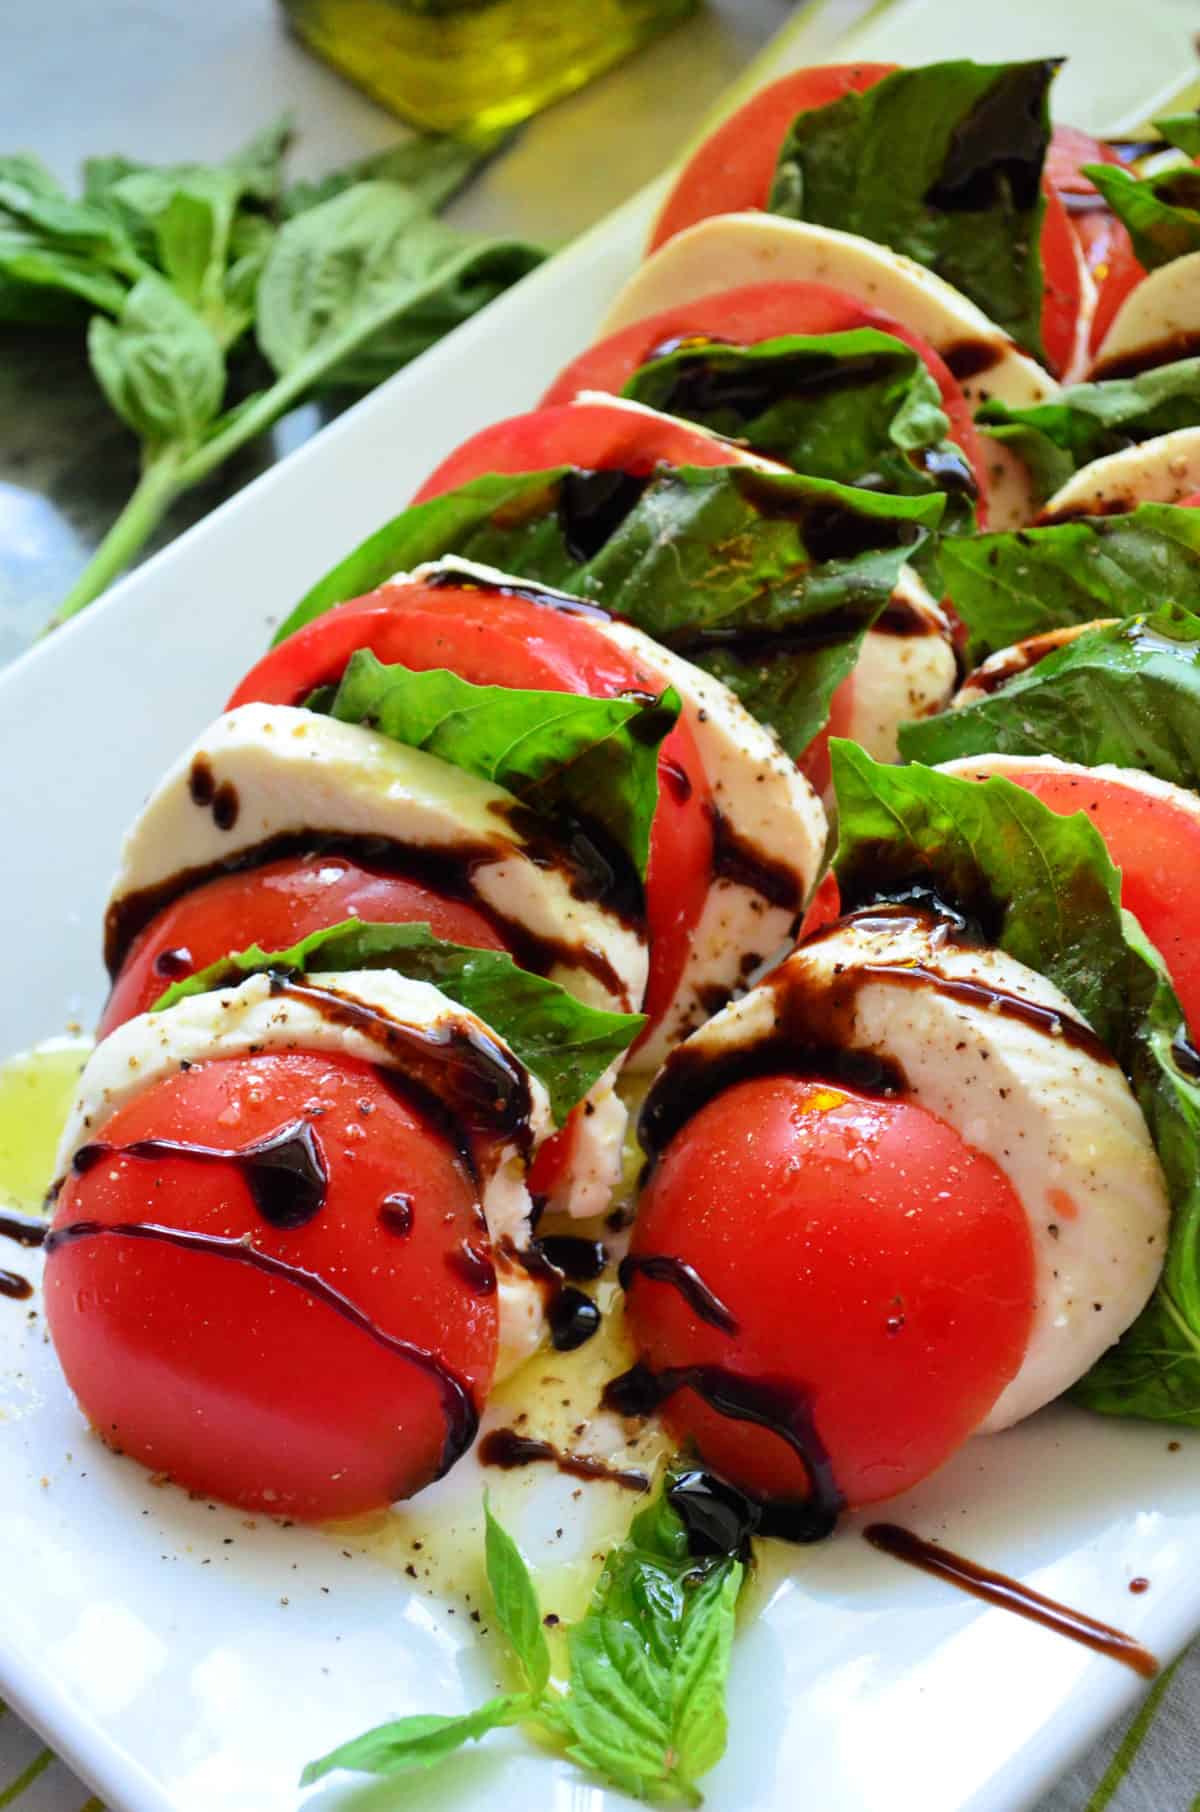 Close up of lined up tomato, basil, mozzarella drizzled with oil and balsamic vinegar.